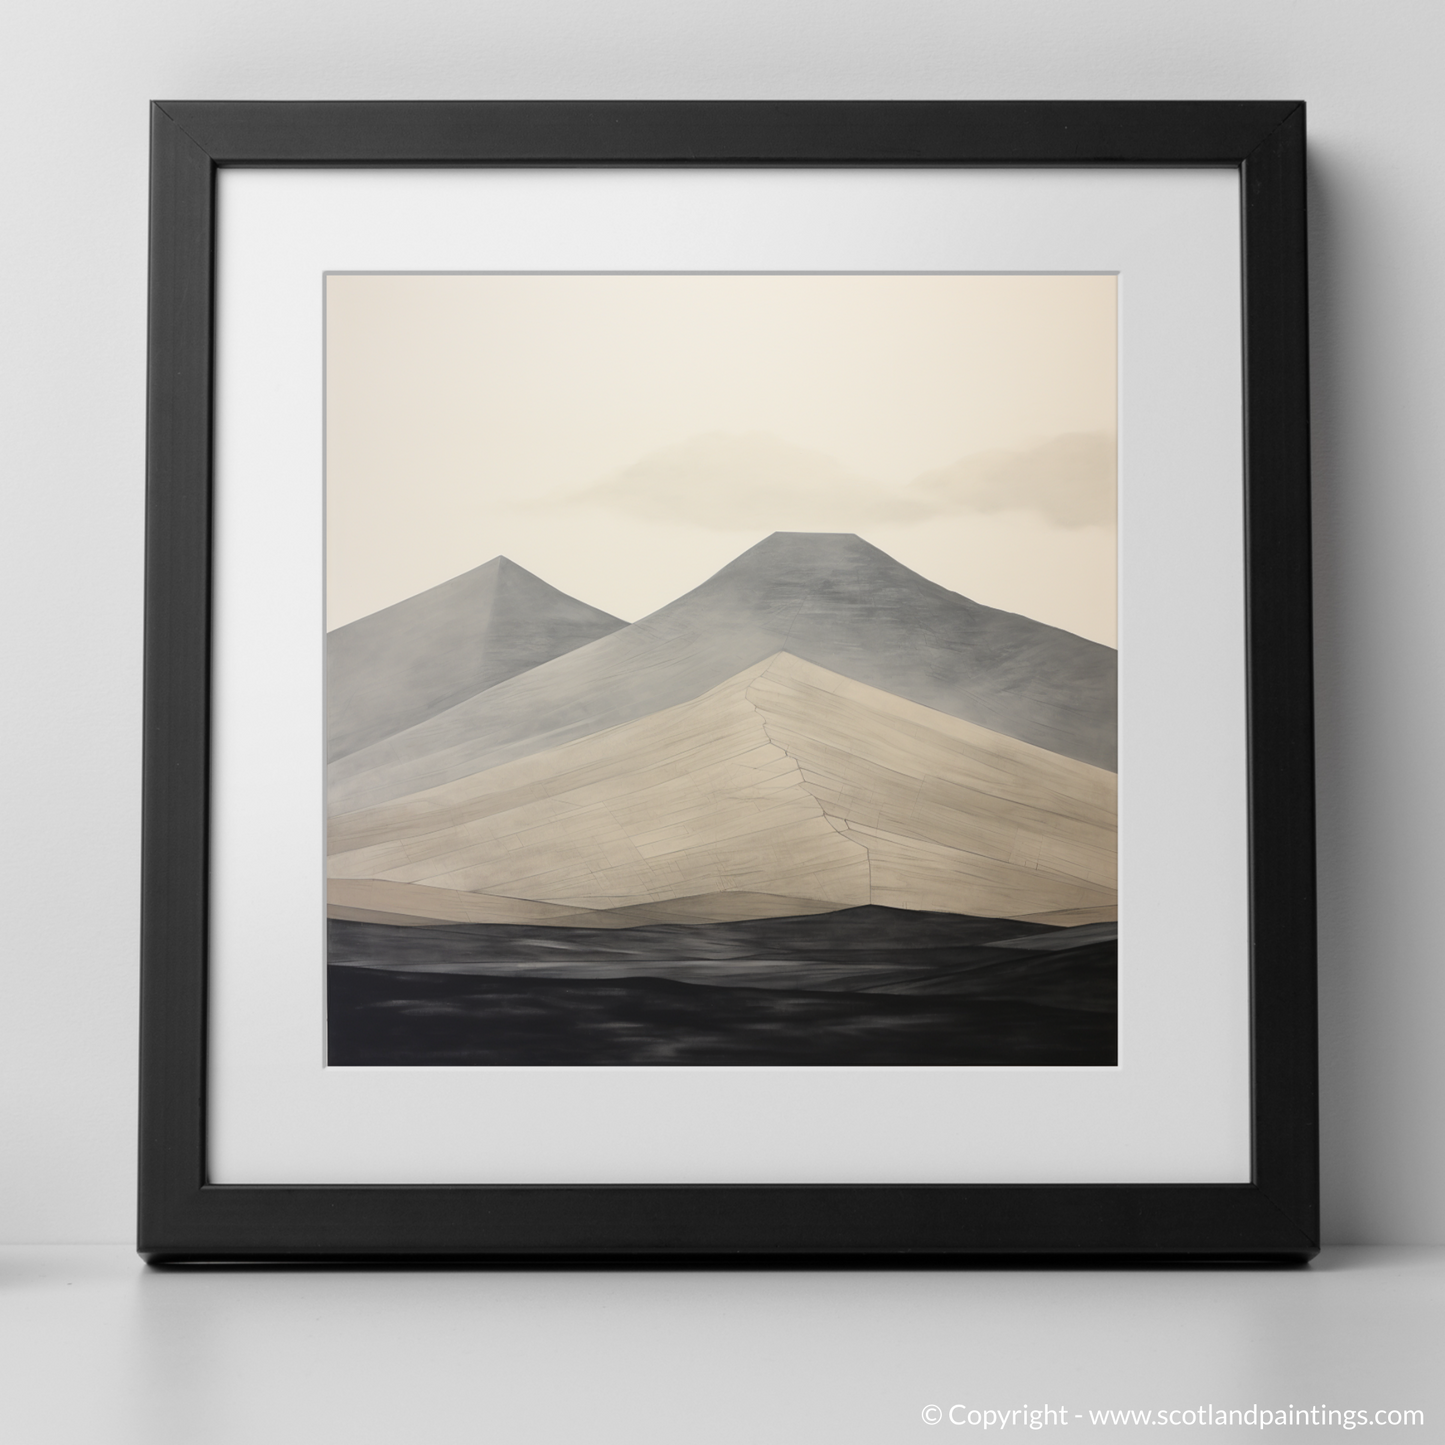 Art Print of Meall Garbh (Ben Lawers) with a black frame